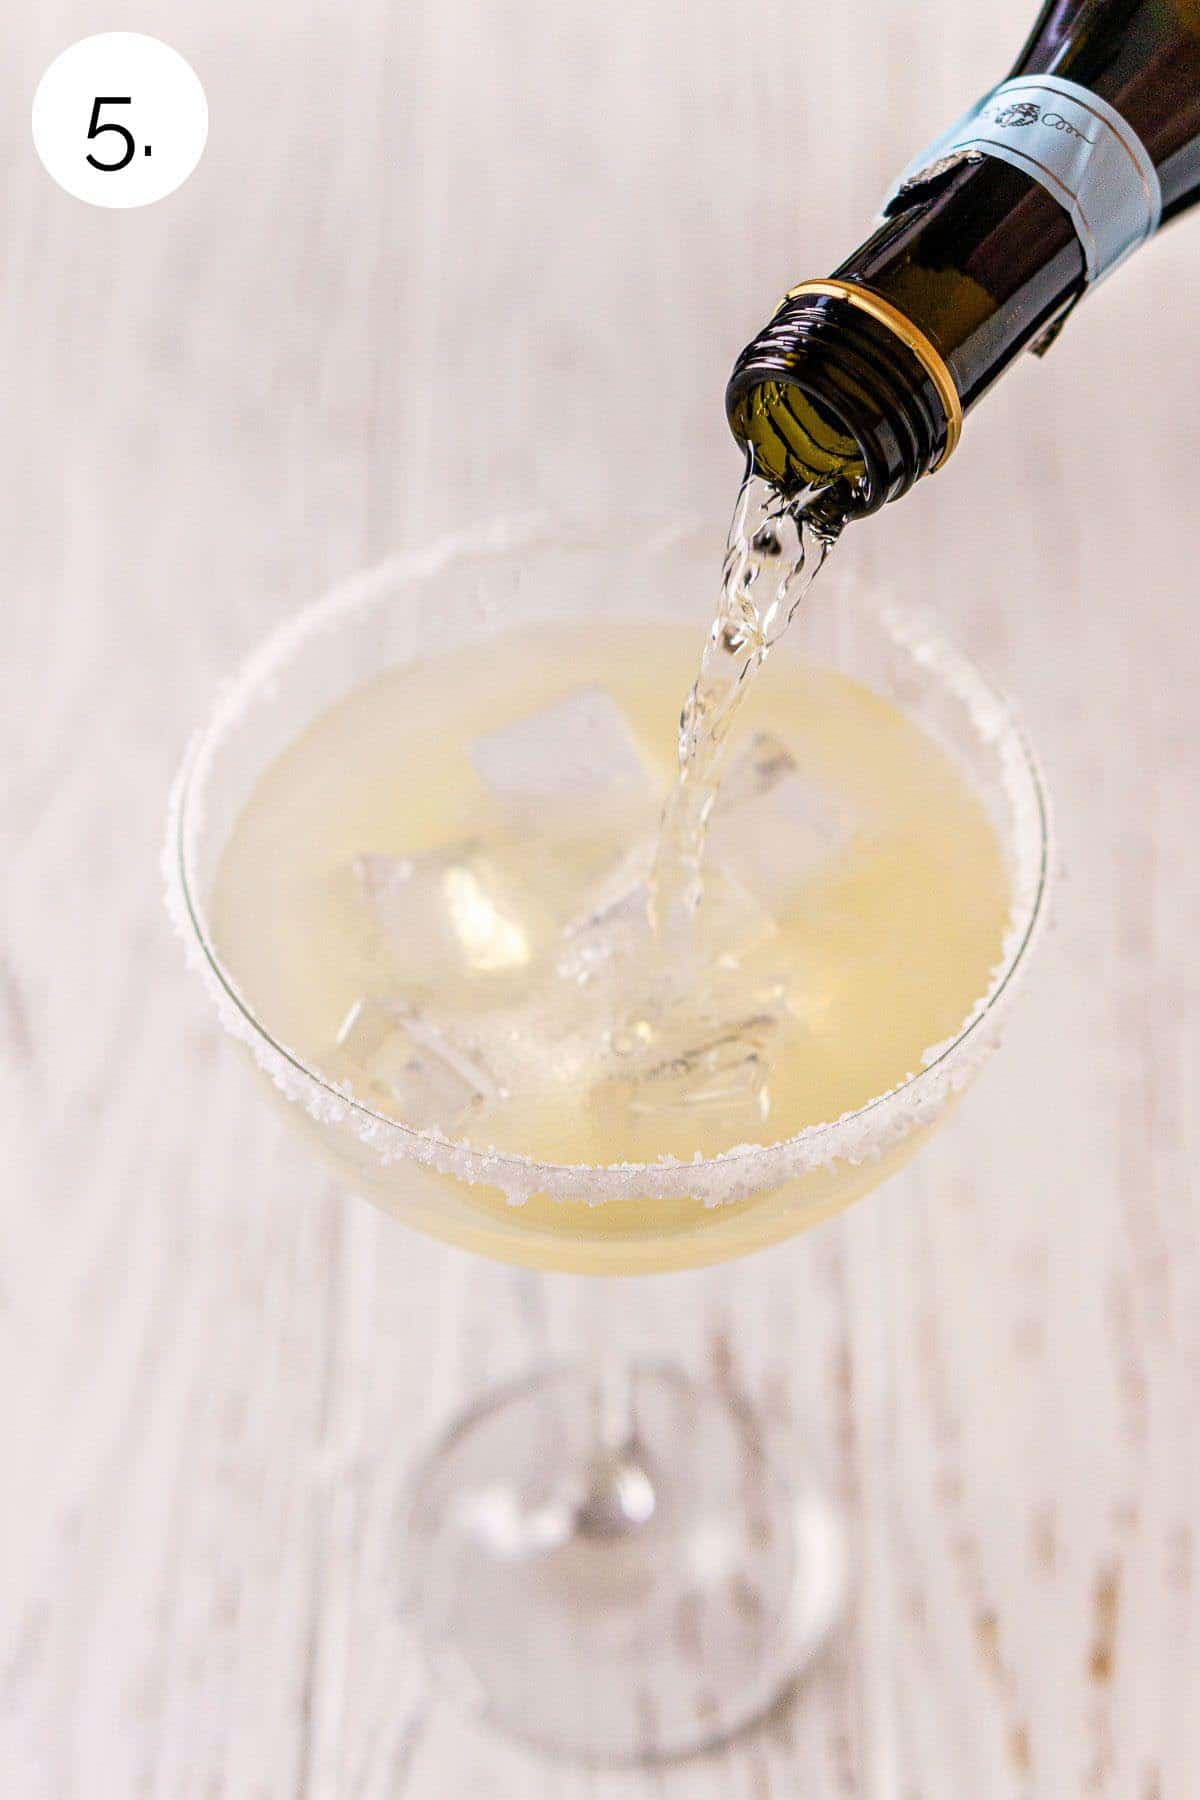 A small prosecco bottle pouring sparkling wine into the margarita glass after straining on a white wooden surface.